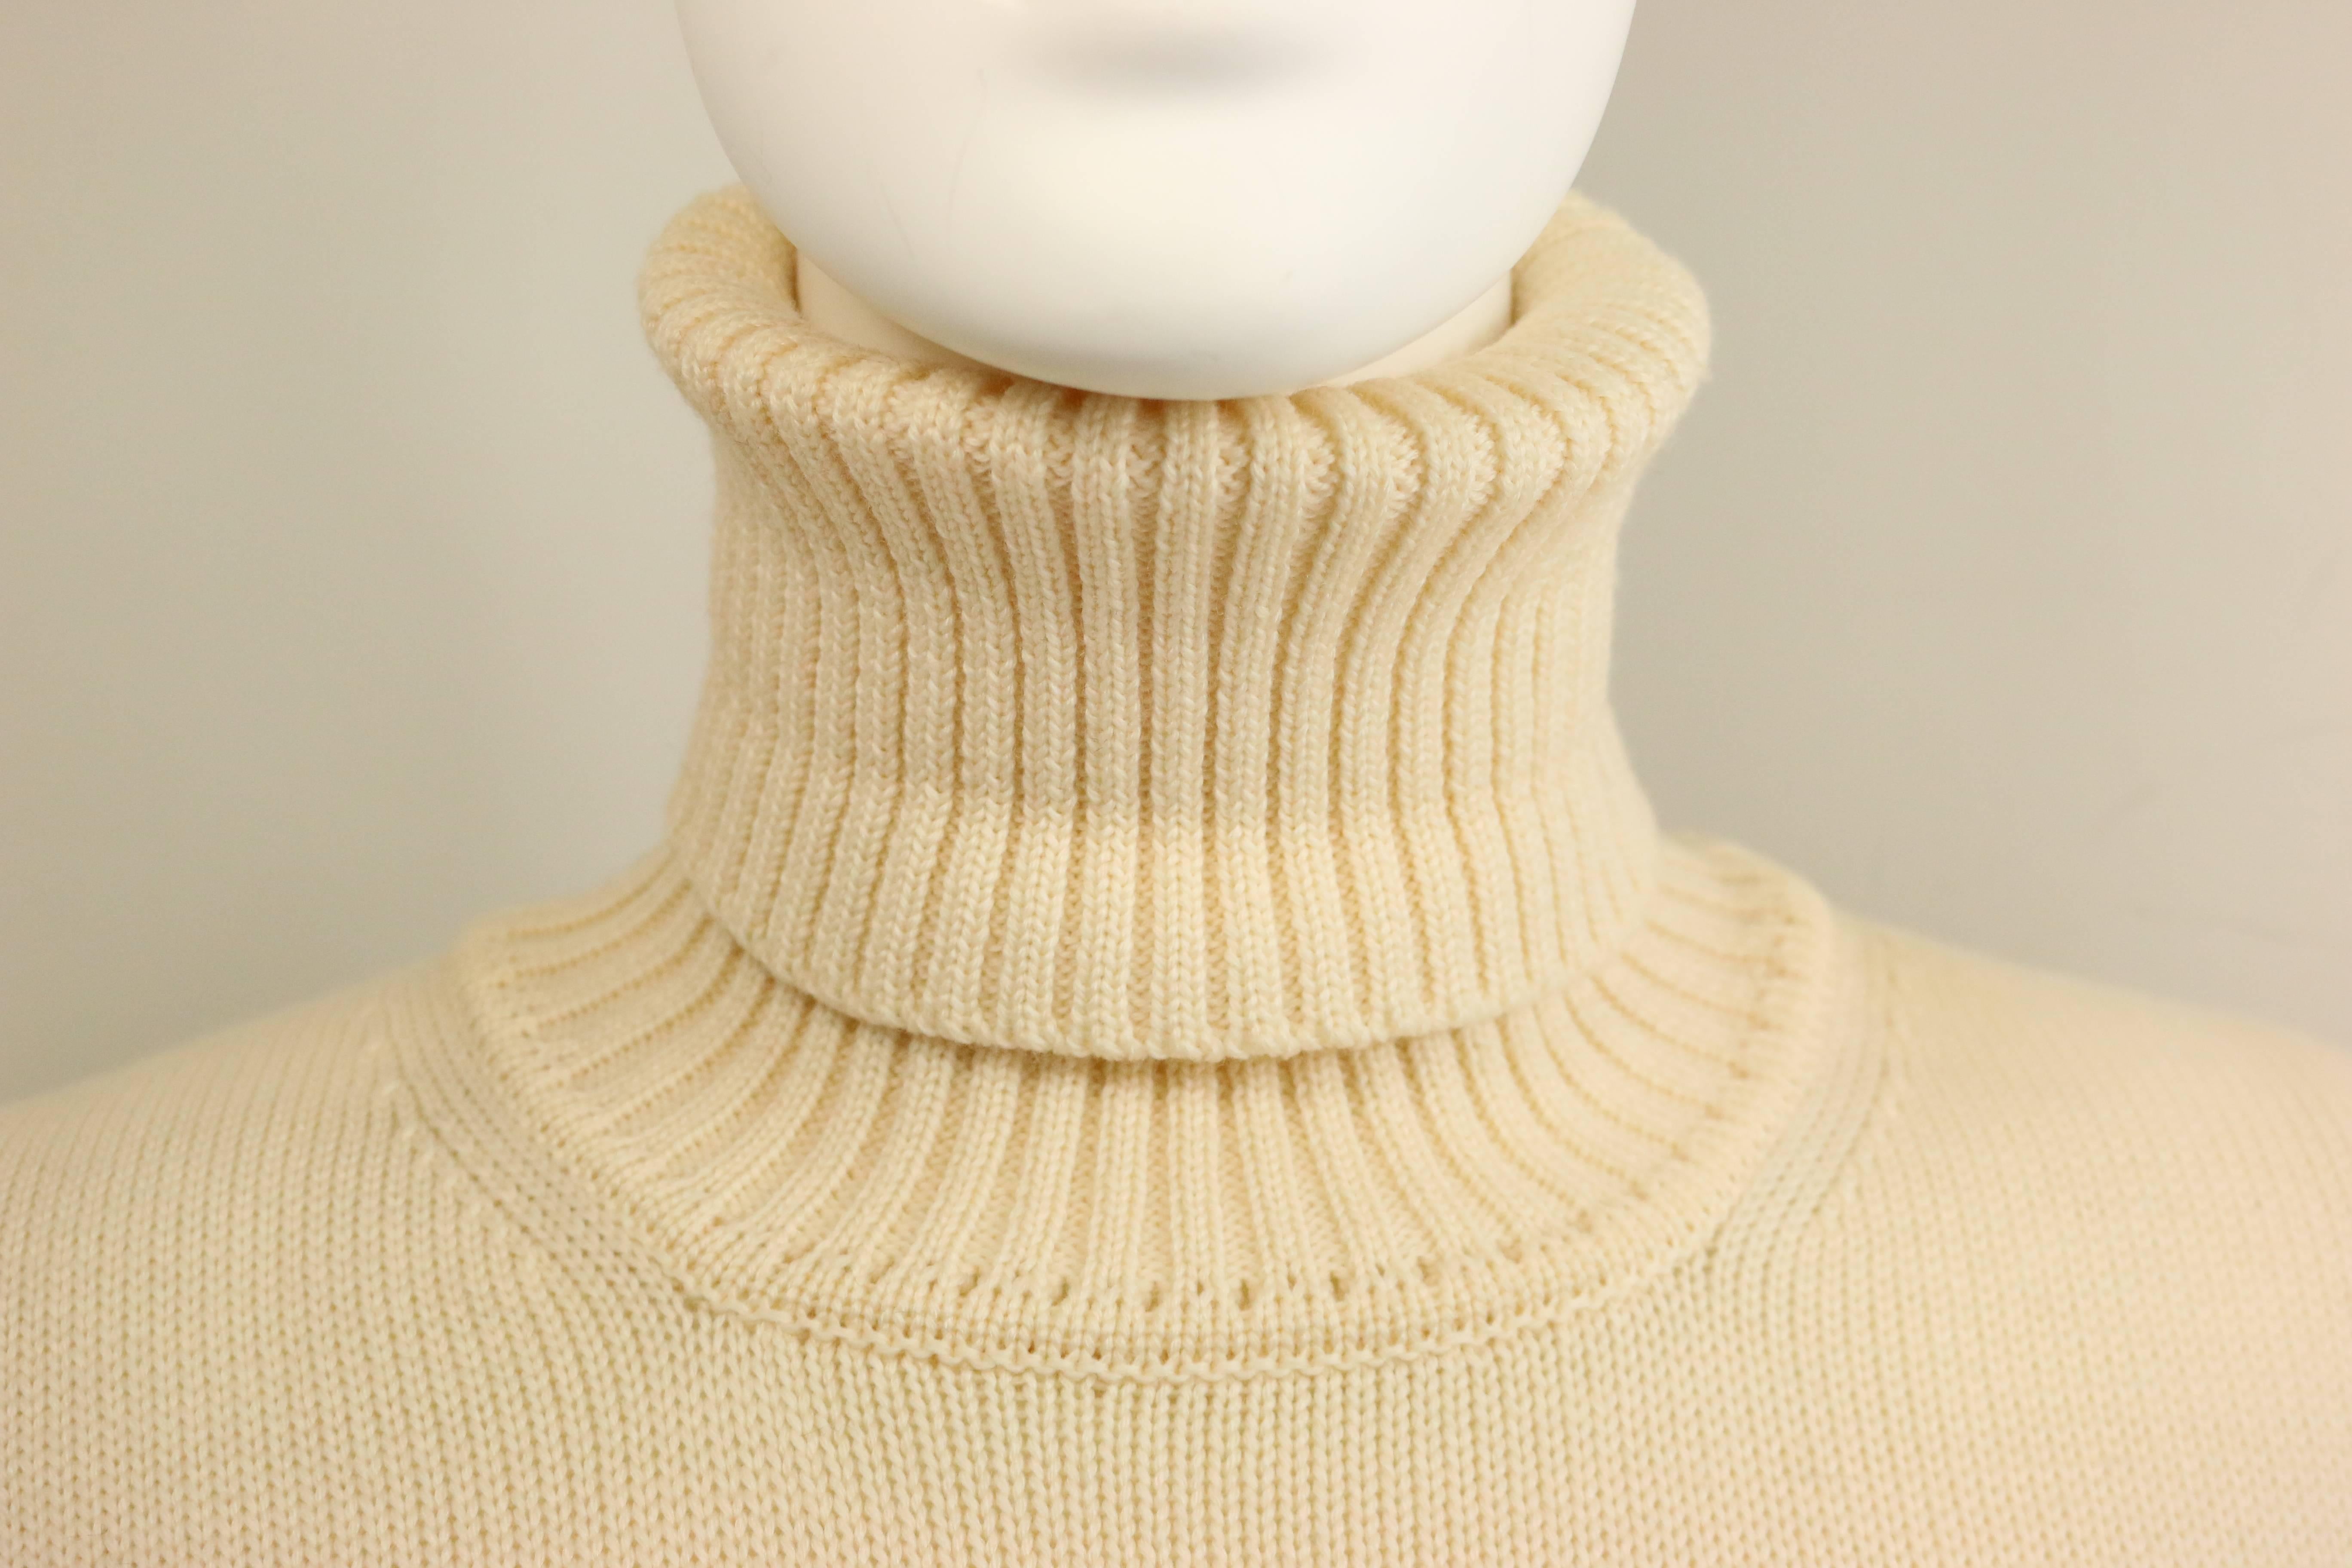 - Vintage Gucci by Tom Ford white wool turtleneck pullover top from Fall 1996 collection. Its a good quality classic item for winter. 

- Slim fitted. 

- Made in Italy. 

- Size L. 

- 100% Fleece Wool. 

 
